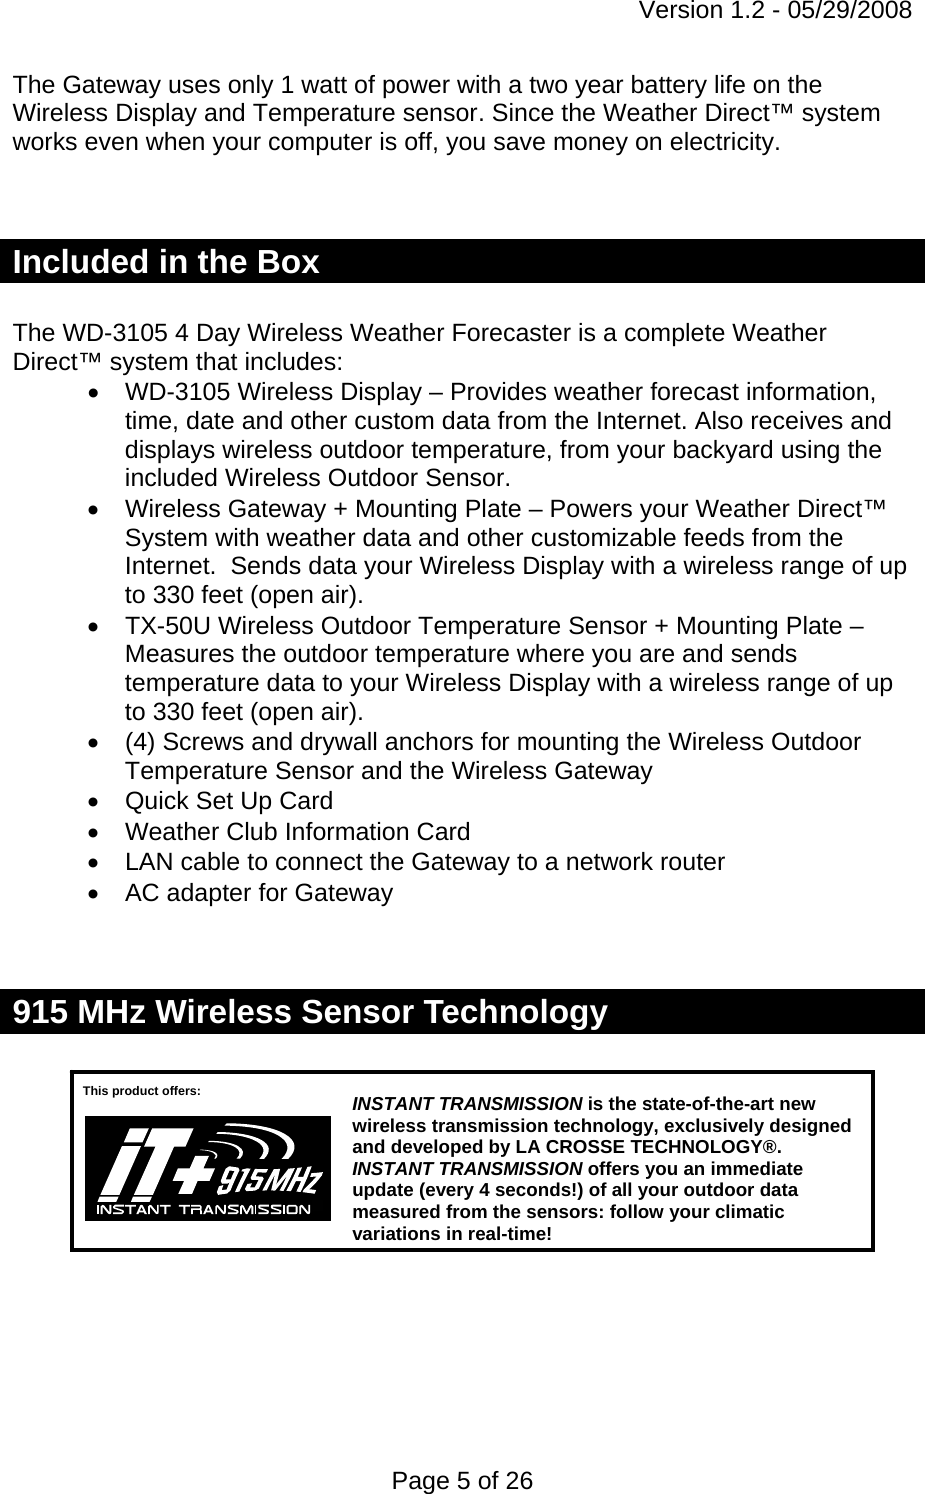 Version 1.2 - 05/29/2008 Page 5 of 26 The Gateway uses only 1 watt of power with a two year battery life on the Wireless Display and Temperature sensor. Since the Weather Direct™ system works even when your computer is off, you save money on electricity.    Included in the Box  The WD-3105 4 Day Wireless Weather Forecaster is a complete Weather Direct™ system that includes: •  WD-3105 Wireless Display – Provides weather forecast information, time, date and other custom data from the Internet. Also receives and displays wireless outdoor temperature, from your backyard using the included Wireless Outdoor Sensor. •  Wireless Gateway + Mounting Plate – Powers your Weather Direct™ System with weather data and other customizable feeds from the Internet.  Sends data your Wireless Display with a wireless range of up to 330 feet (open air). •  TX-50U Wireless Outdoor Temperature Sensor + Mounting Plate – Measures the outdoor temperature where you are and sends temperature data to your Wireless Display with a wireless range of up to 330 feet (open air). •  (4) Screws and drywall anchors for mounting the Wireless Outdoor Temperature Sensor and the Wireless Gateway •  Quick Set Up Card •  Weather Club Information Card •  LAN cable to connect the Gateway to a network router •  AC adapter for Gateway   915 MHz Wireless Sensor Technology         This product offers:  INSTANT TRANSMISSIONis the state-of-the-art new wireless transmission technology, exclusively designed and developed by LA CROSSE TECHNOLOGY®. INSTANT TRANSMISSION offers you an immediate update (every 4 seconds!) of all your outdoor data measured from the sensors: follow your climatic variations in real-time! 